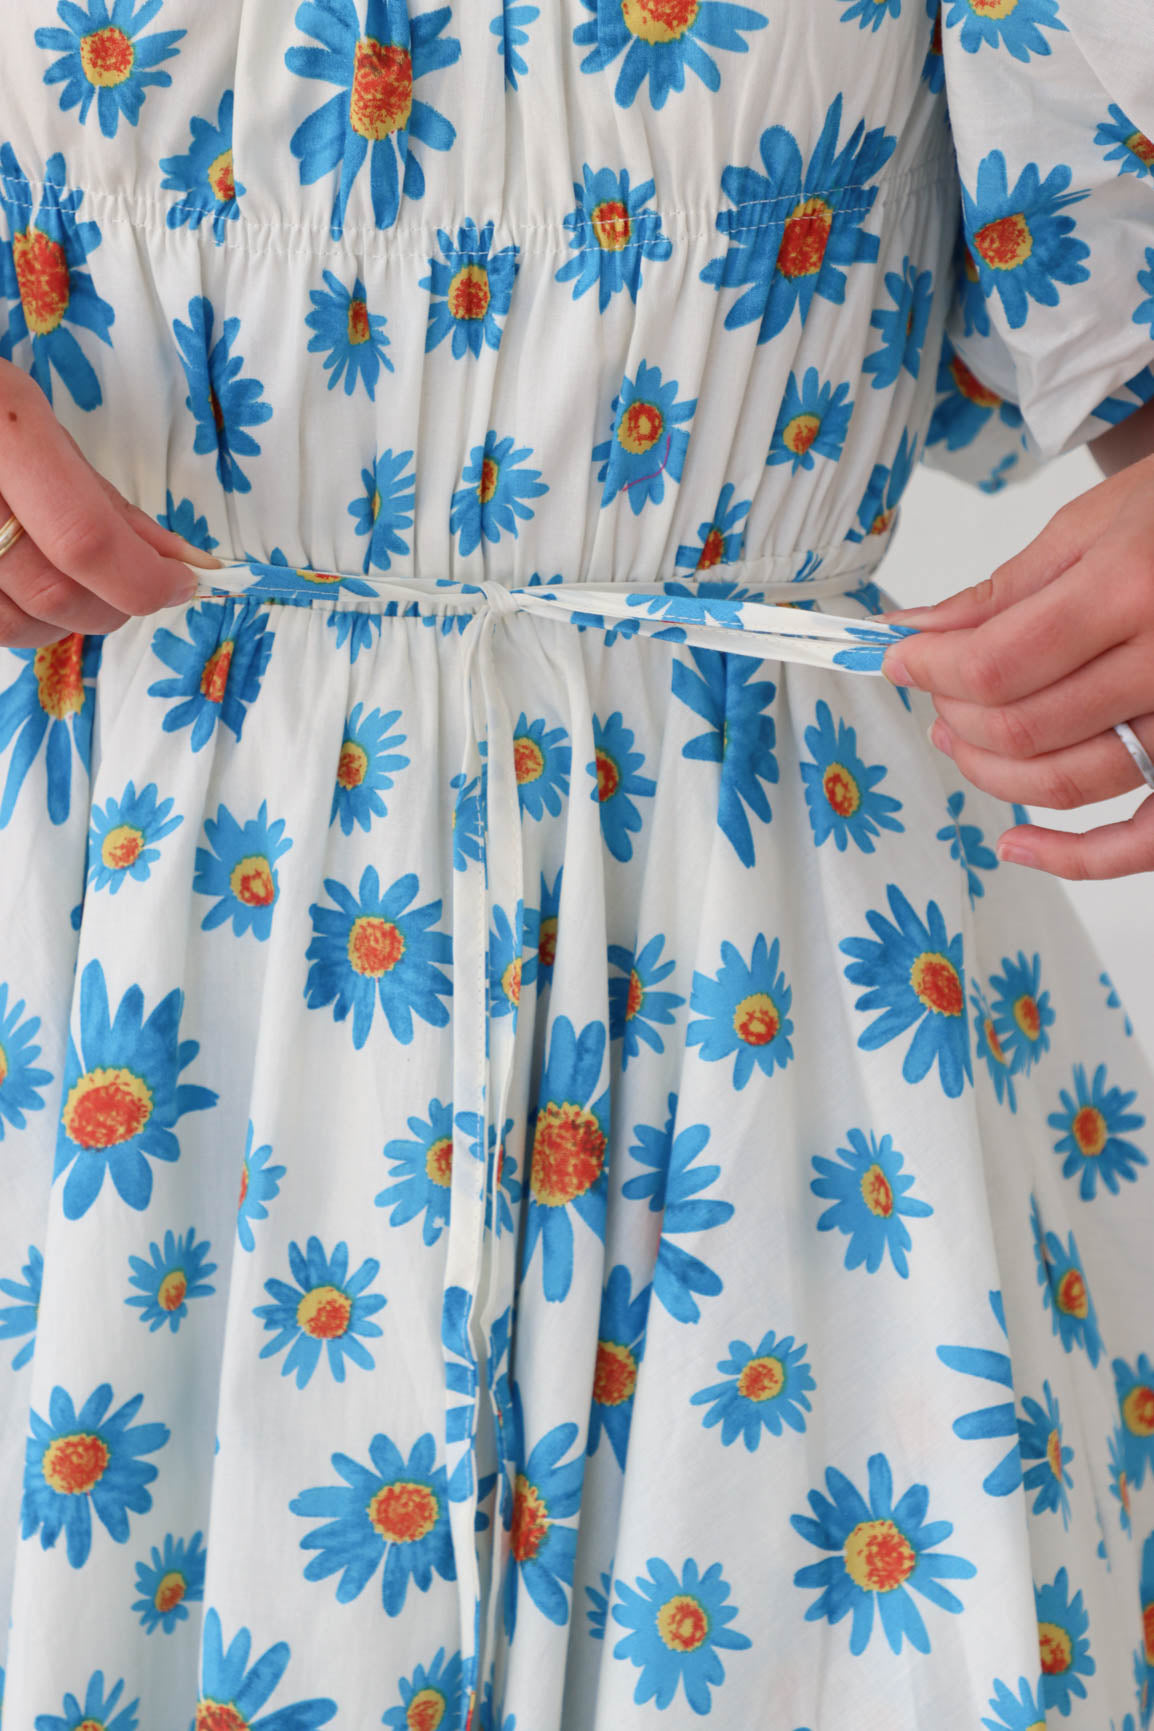 waist tie on white puff sleeved dress with blue florals 